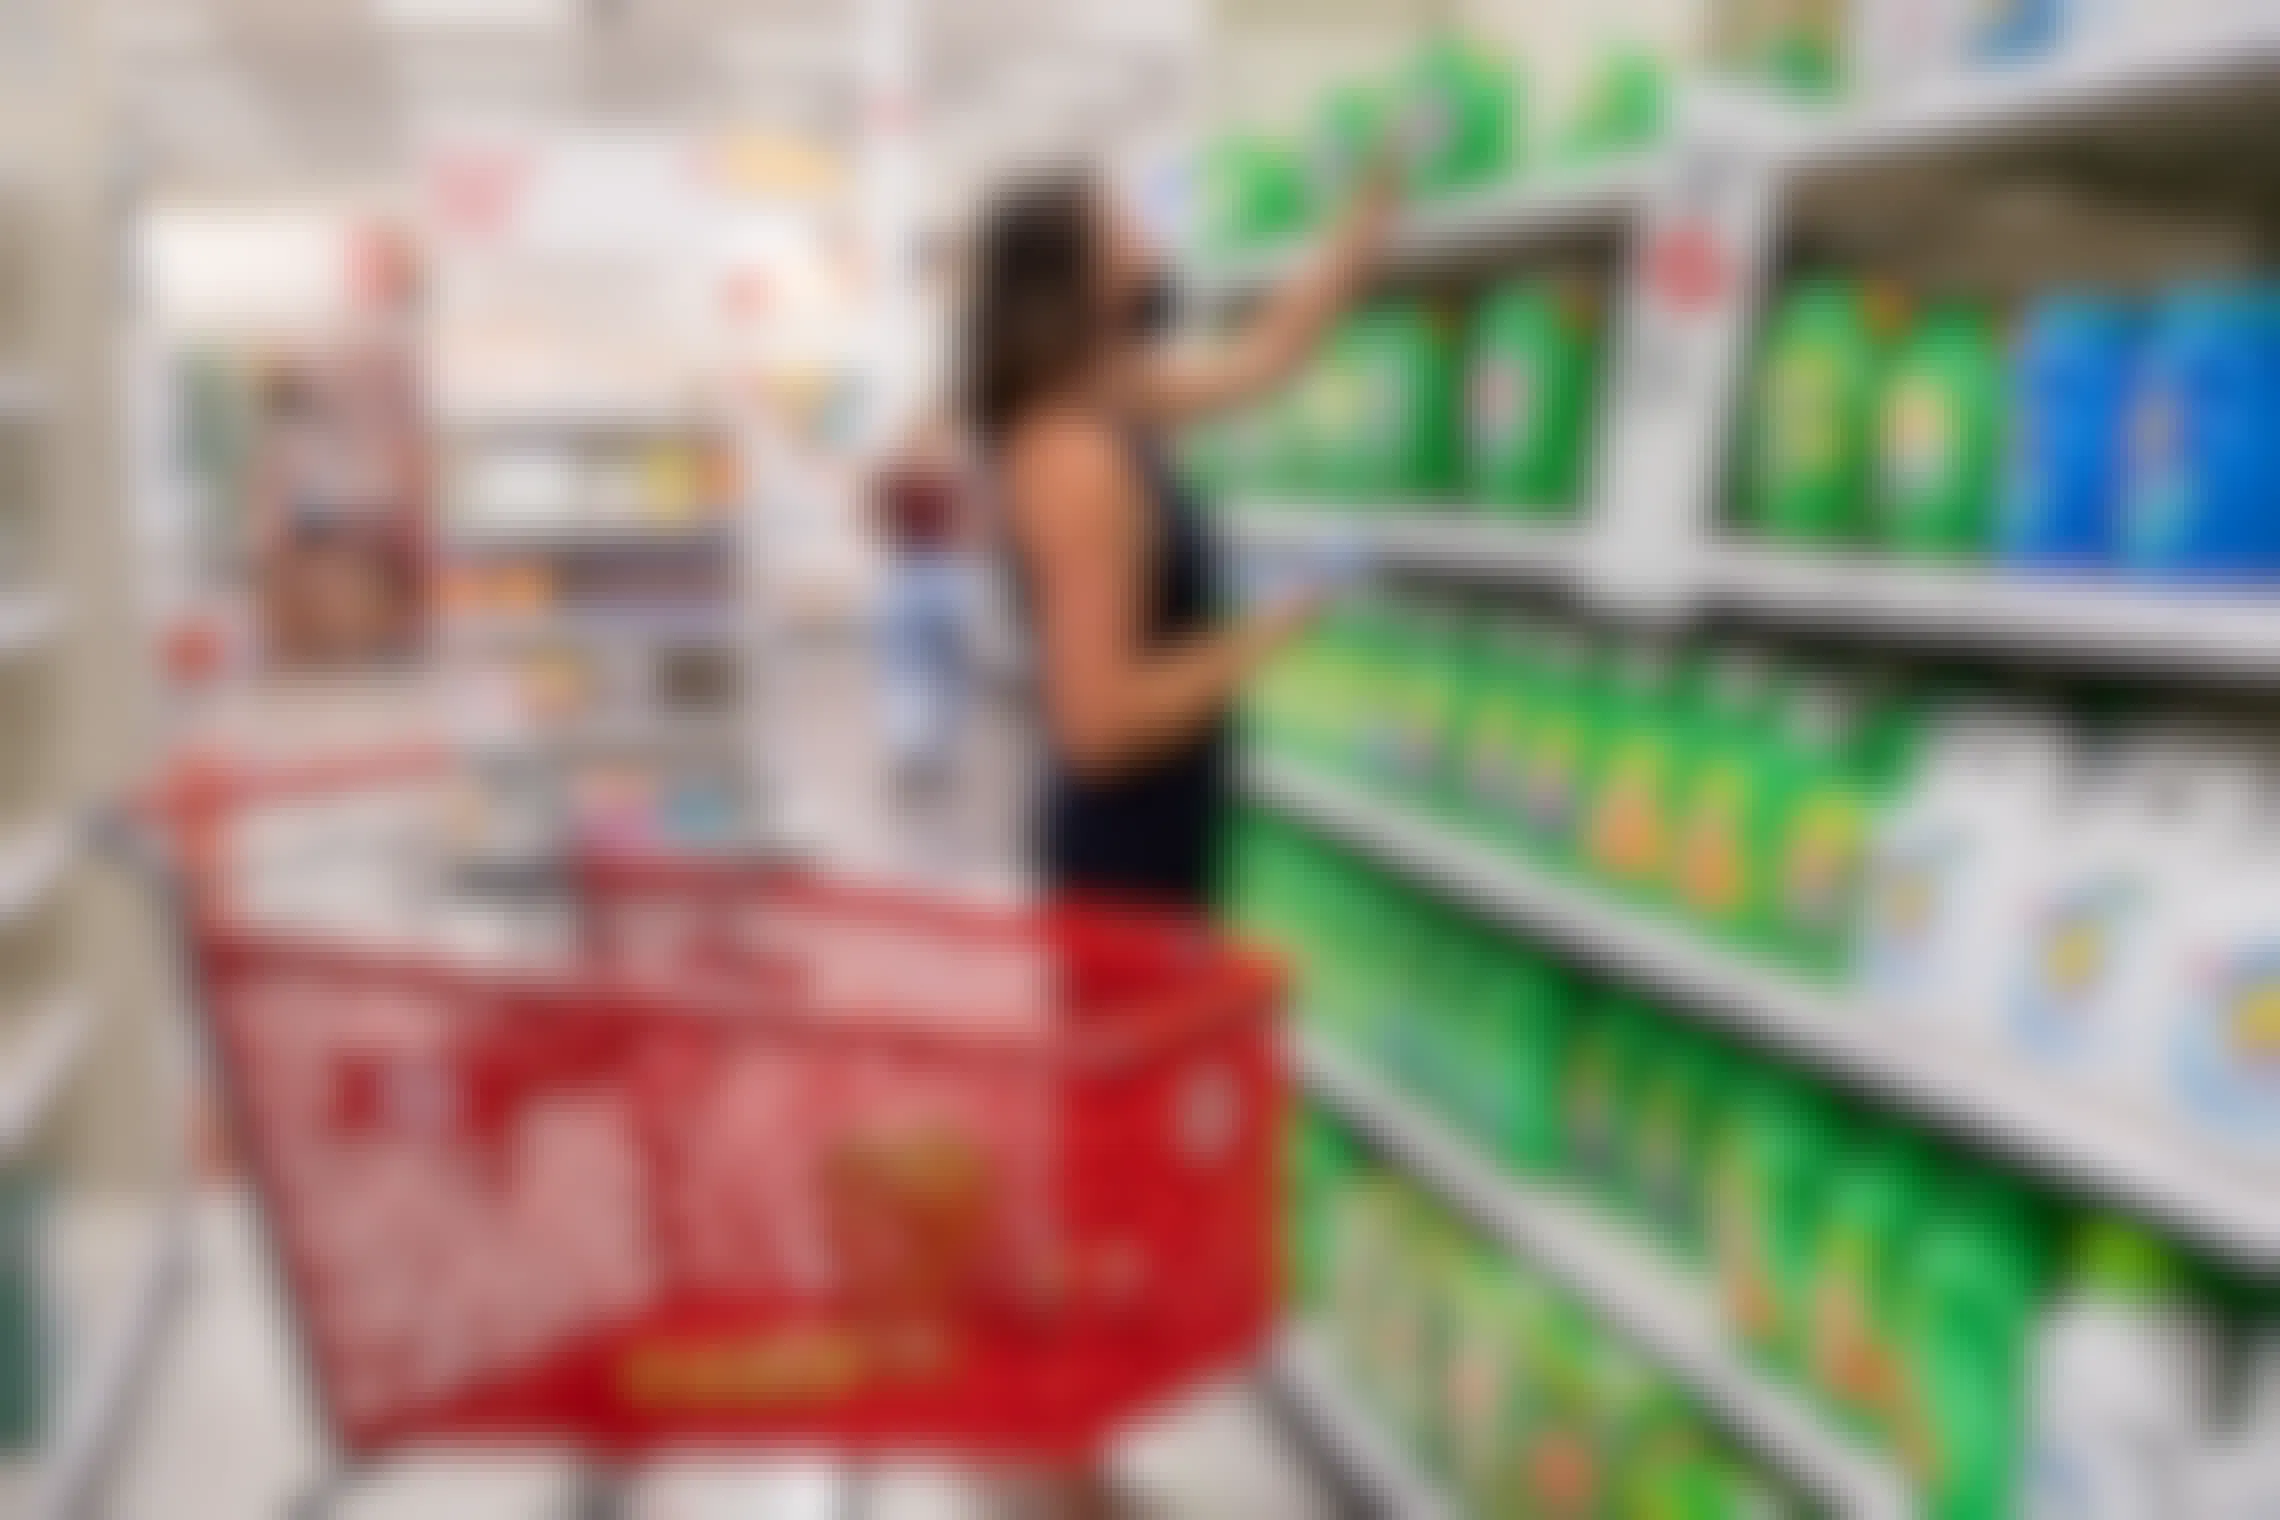 A woman standing in the laundry detergent aisle at Target, reaching to grab a container of Gain off of the top shelf. Next to her is a Target shopping cart with other laundry products sitting in it.